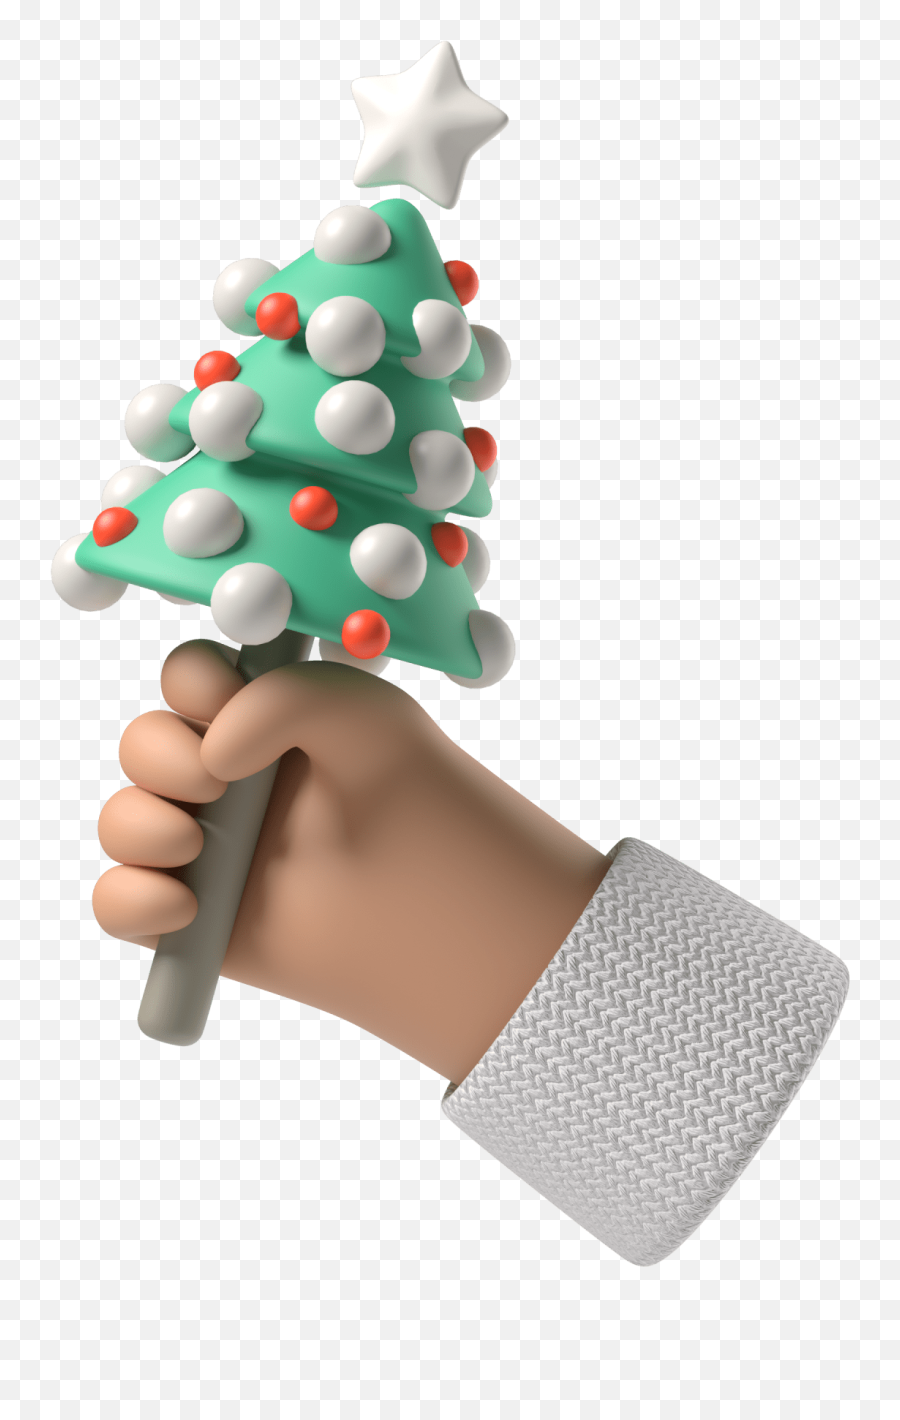 3d Christmas Decorations - Christmas Decoration 3d Hd Png,Icon Christmas Ornaments